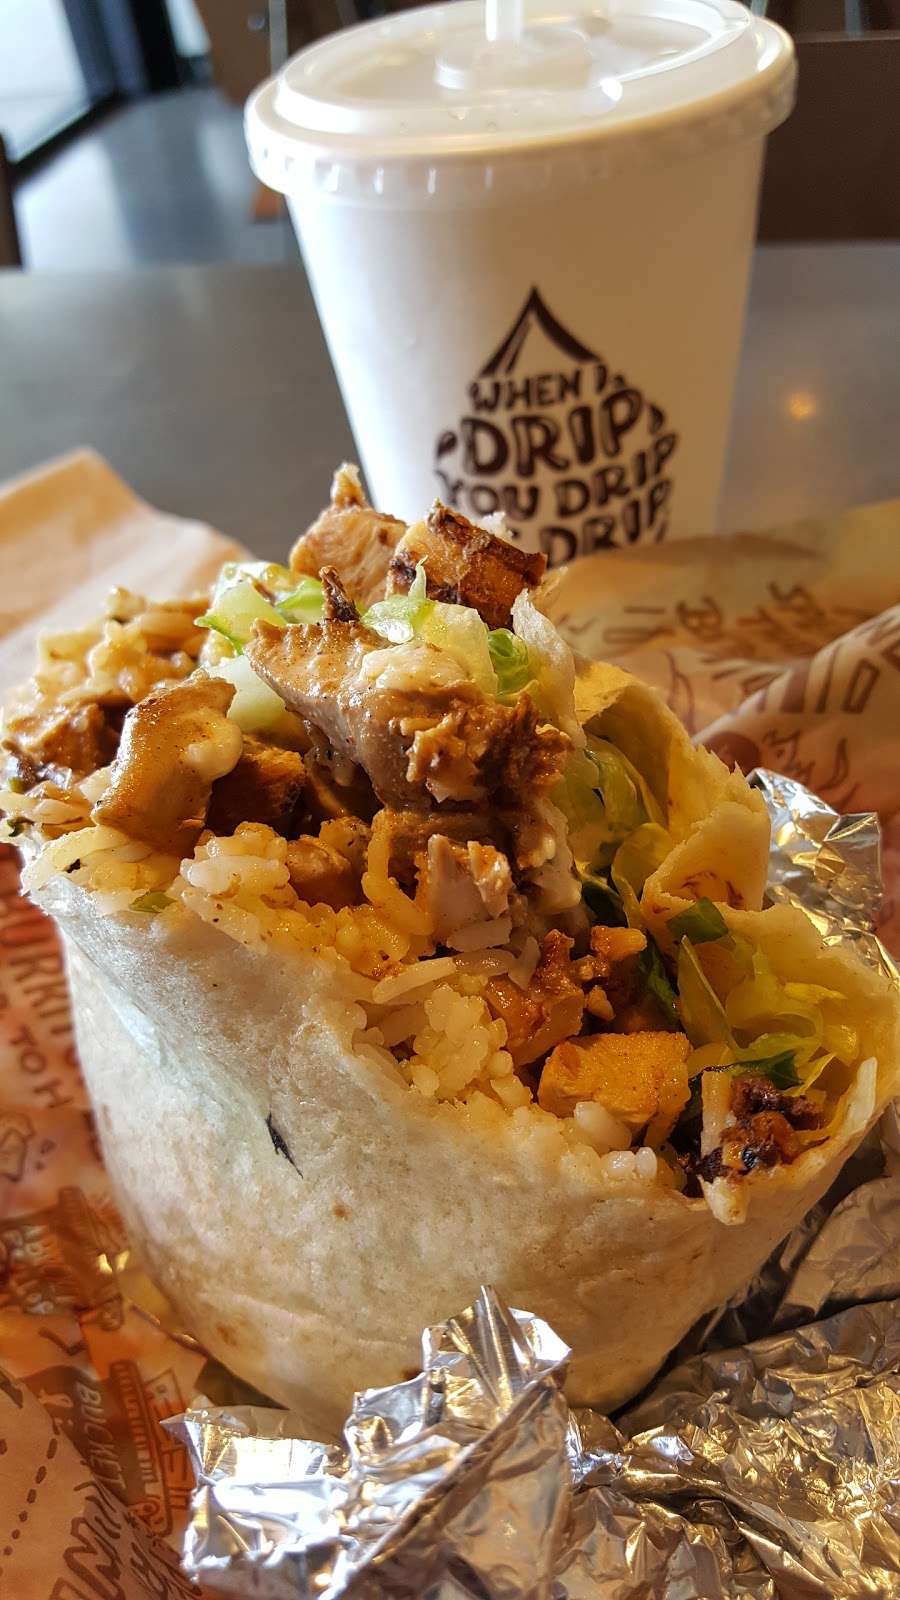 Chipotle Mexican Grill | 495 College Blvd Ste A, Oceanside, CA 92057, USA | Phone: (760) 758-1493